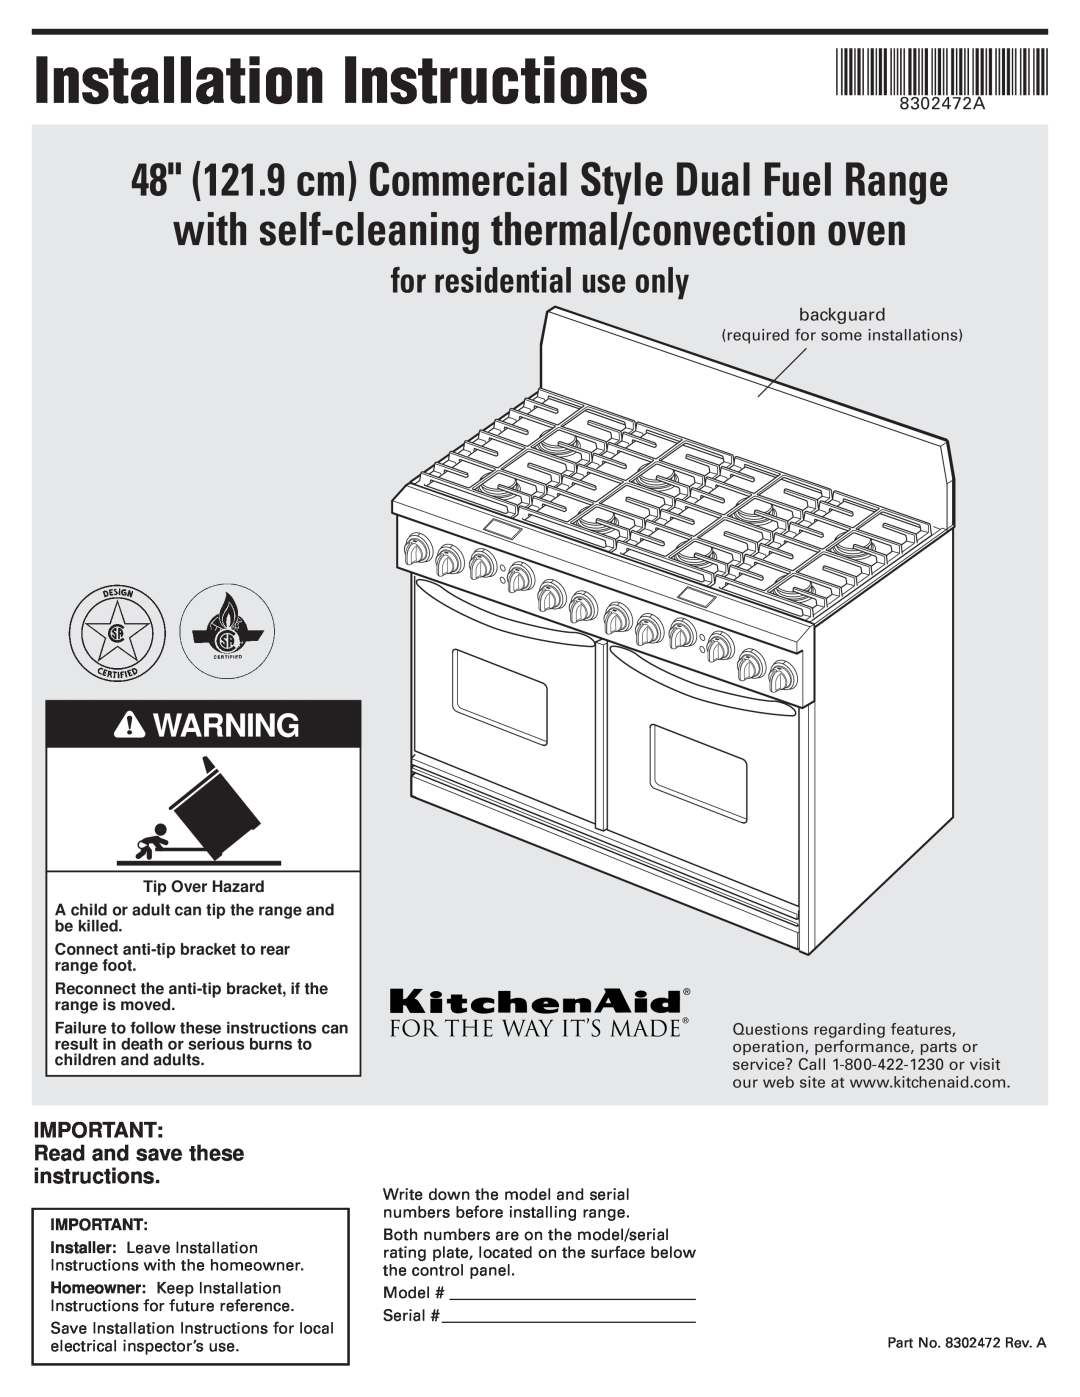 KitchenAid 8302472A installation instructions Installation Instructions, 48 121.9 cm Commercial Style Dual Fuel Range 